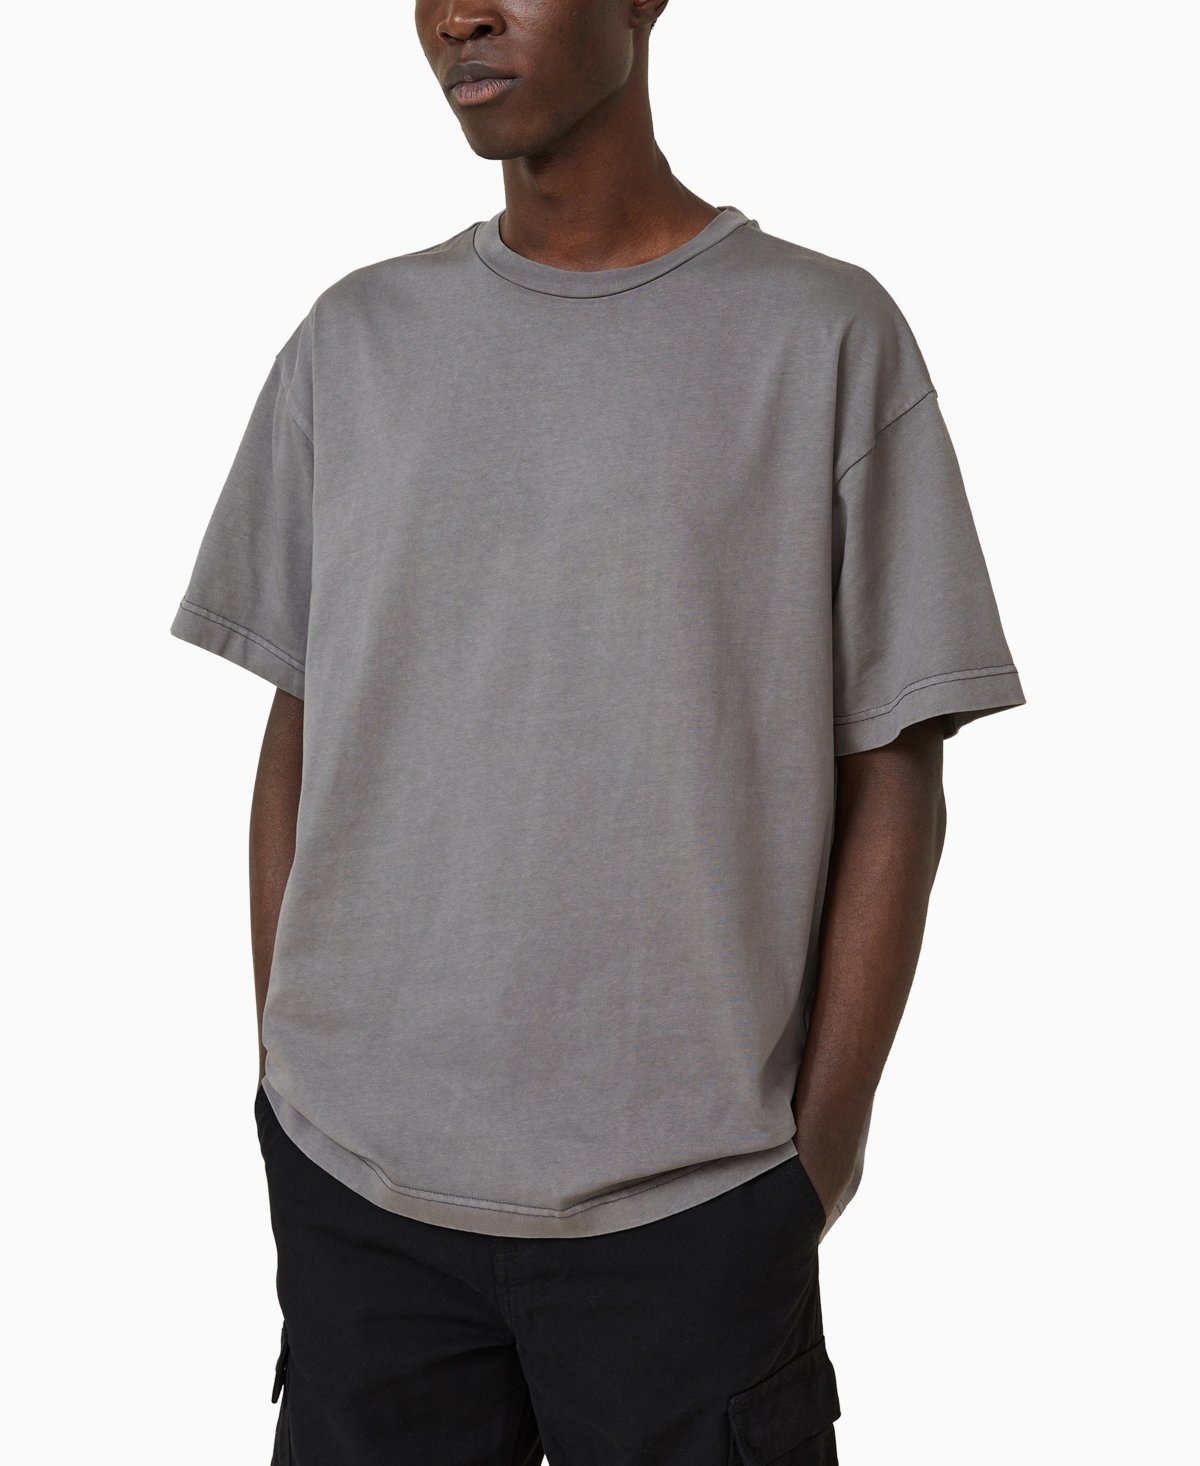 COTTON ON MEN'S HEAVY WEIGHT SOLID T-SHIRT